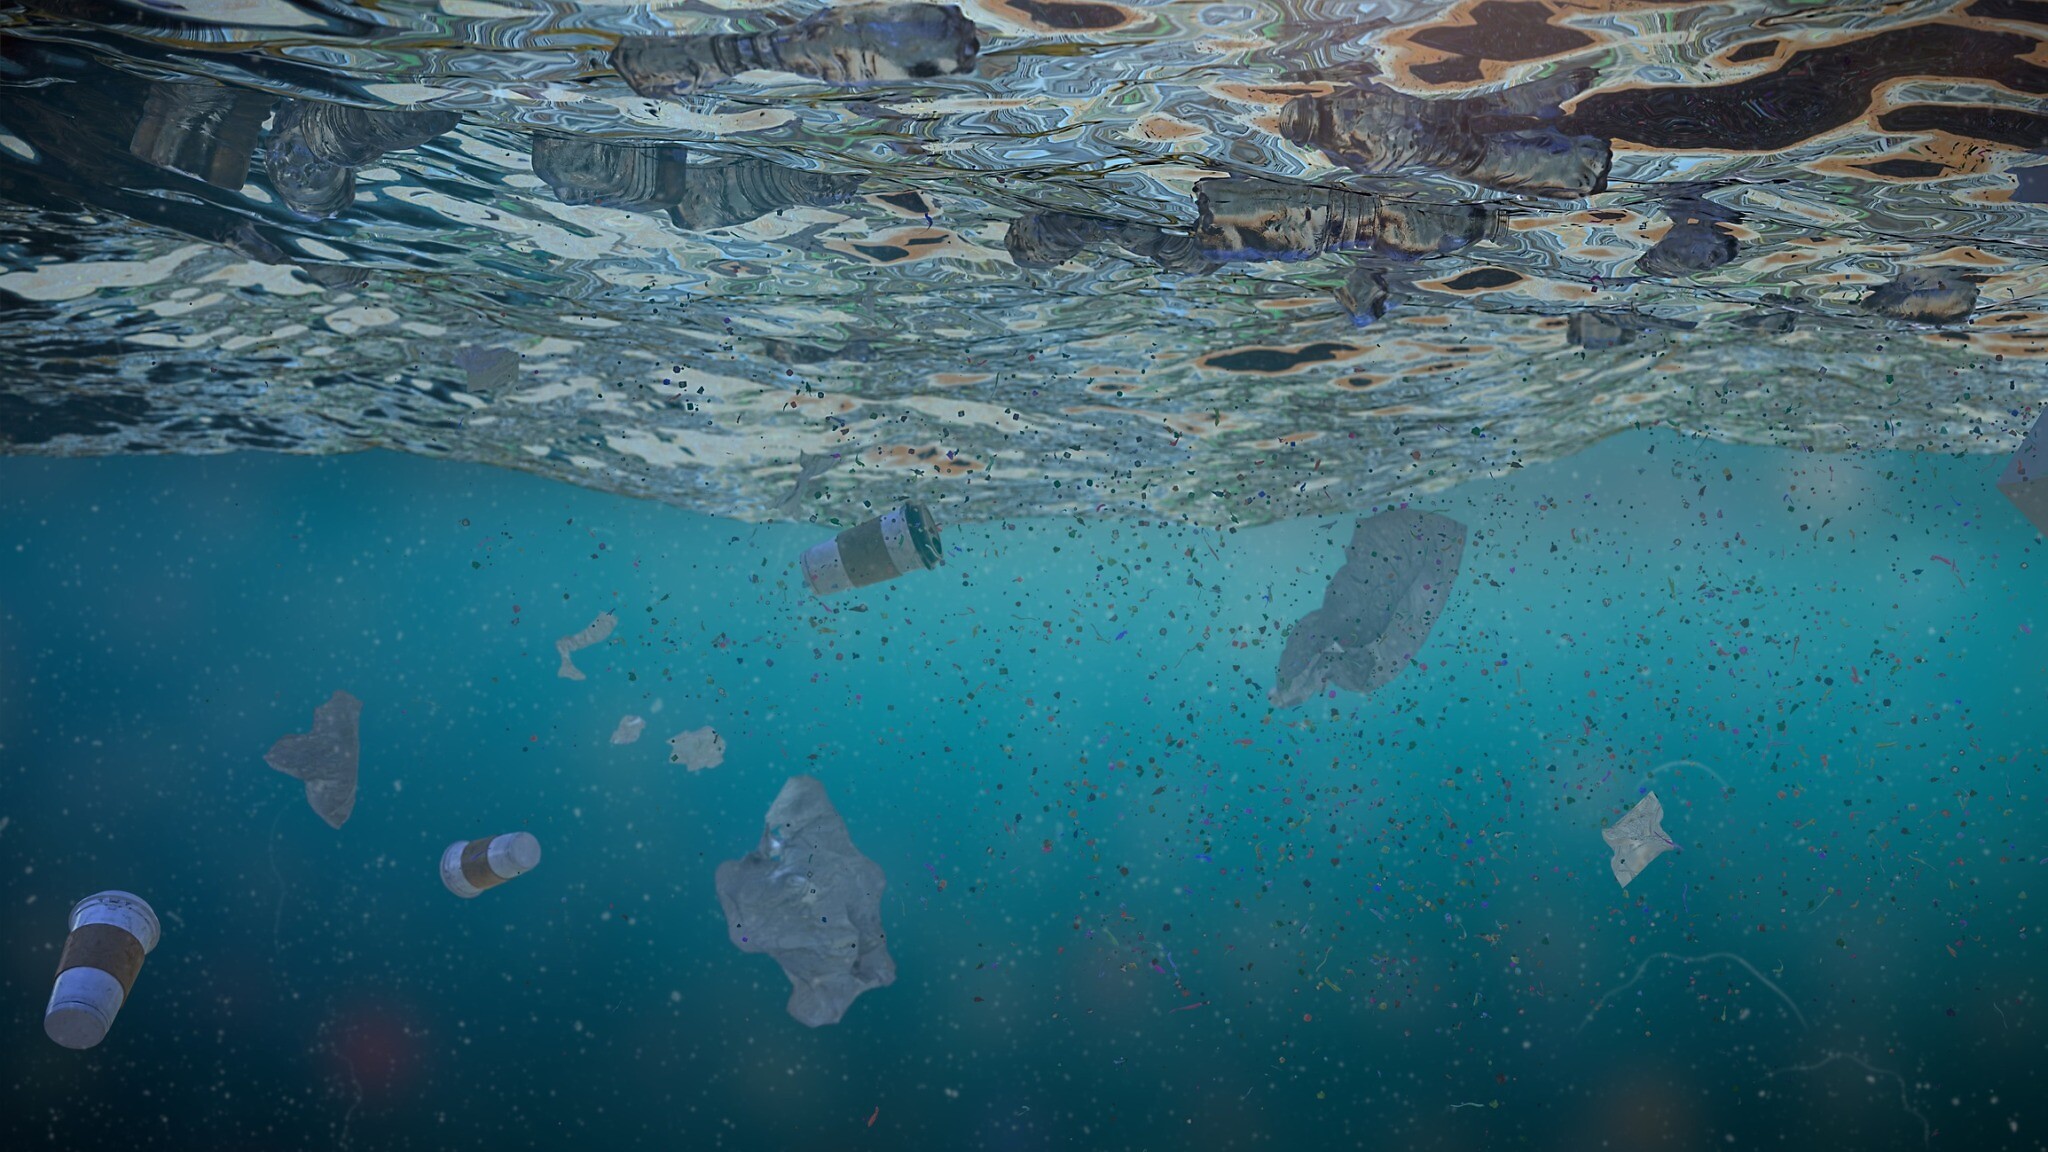 Plastic bags and containers make up 70% of Israel's Med, Red Sea trash ...